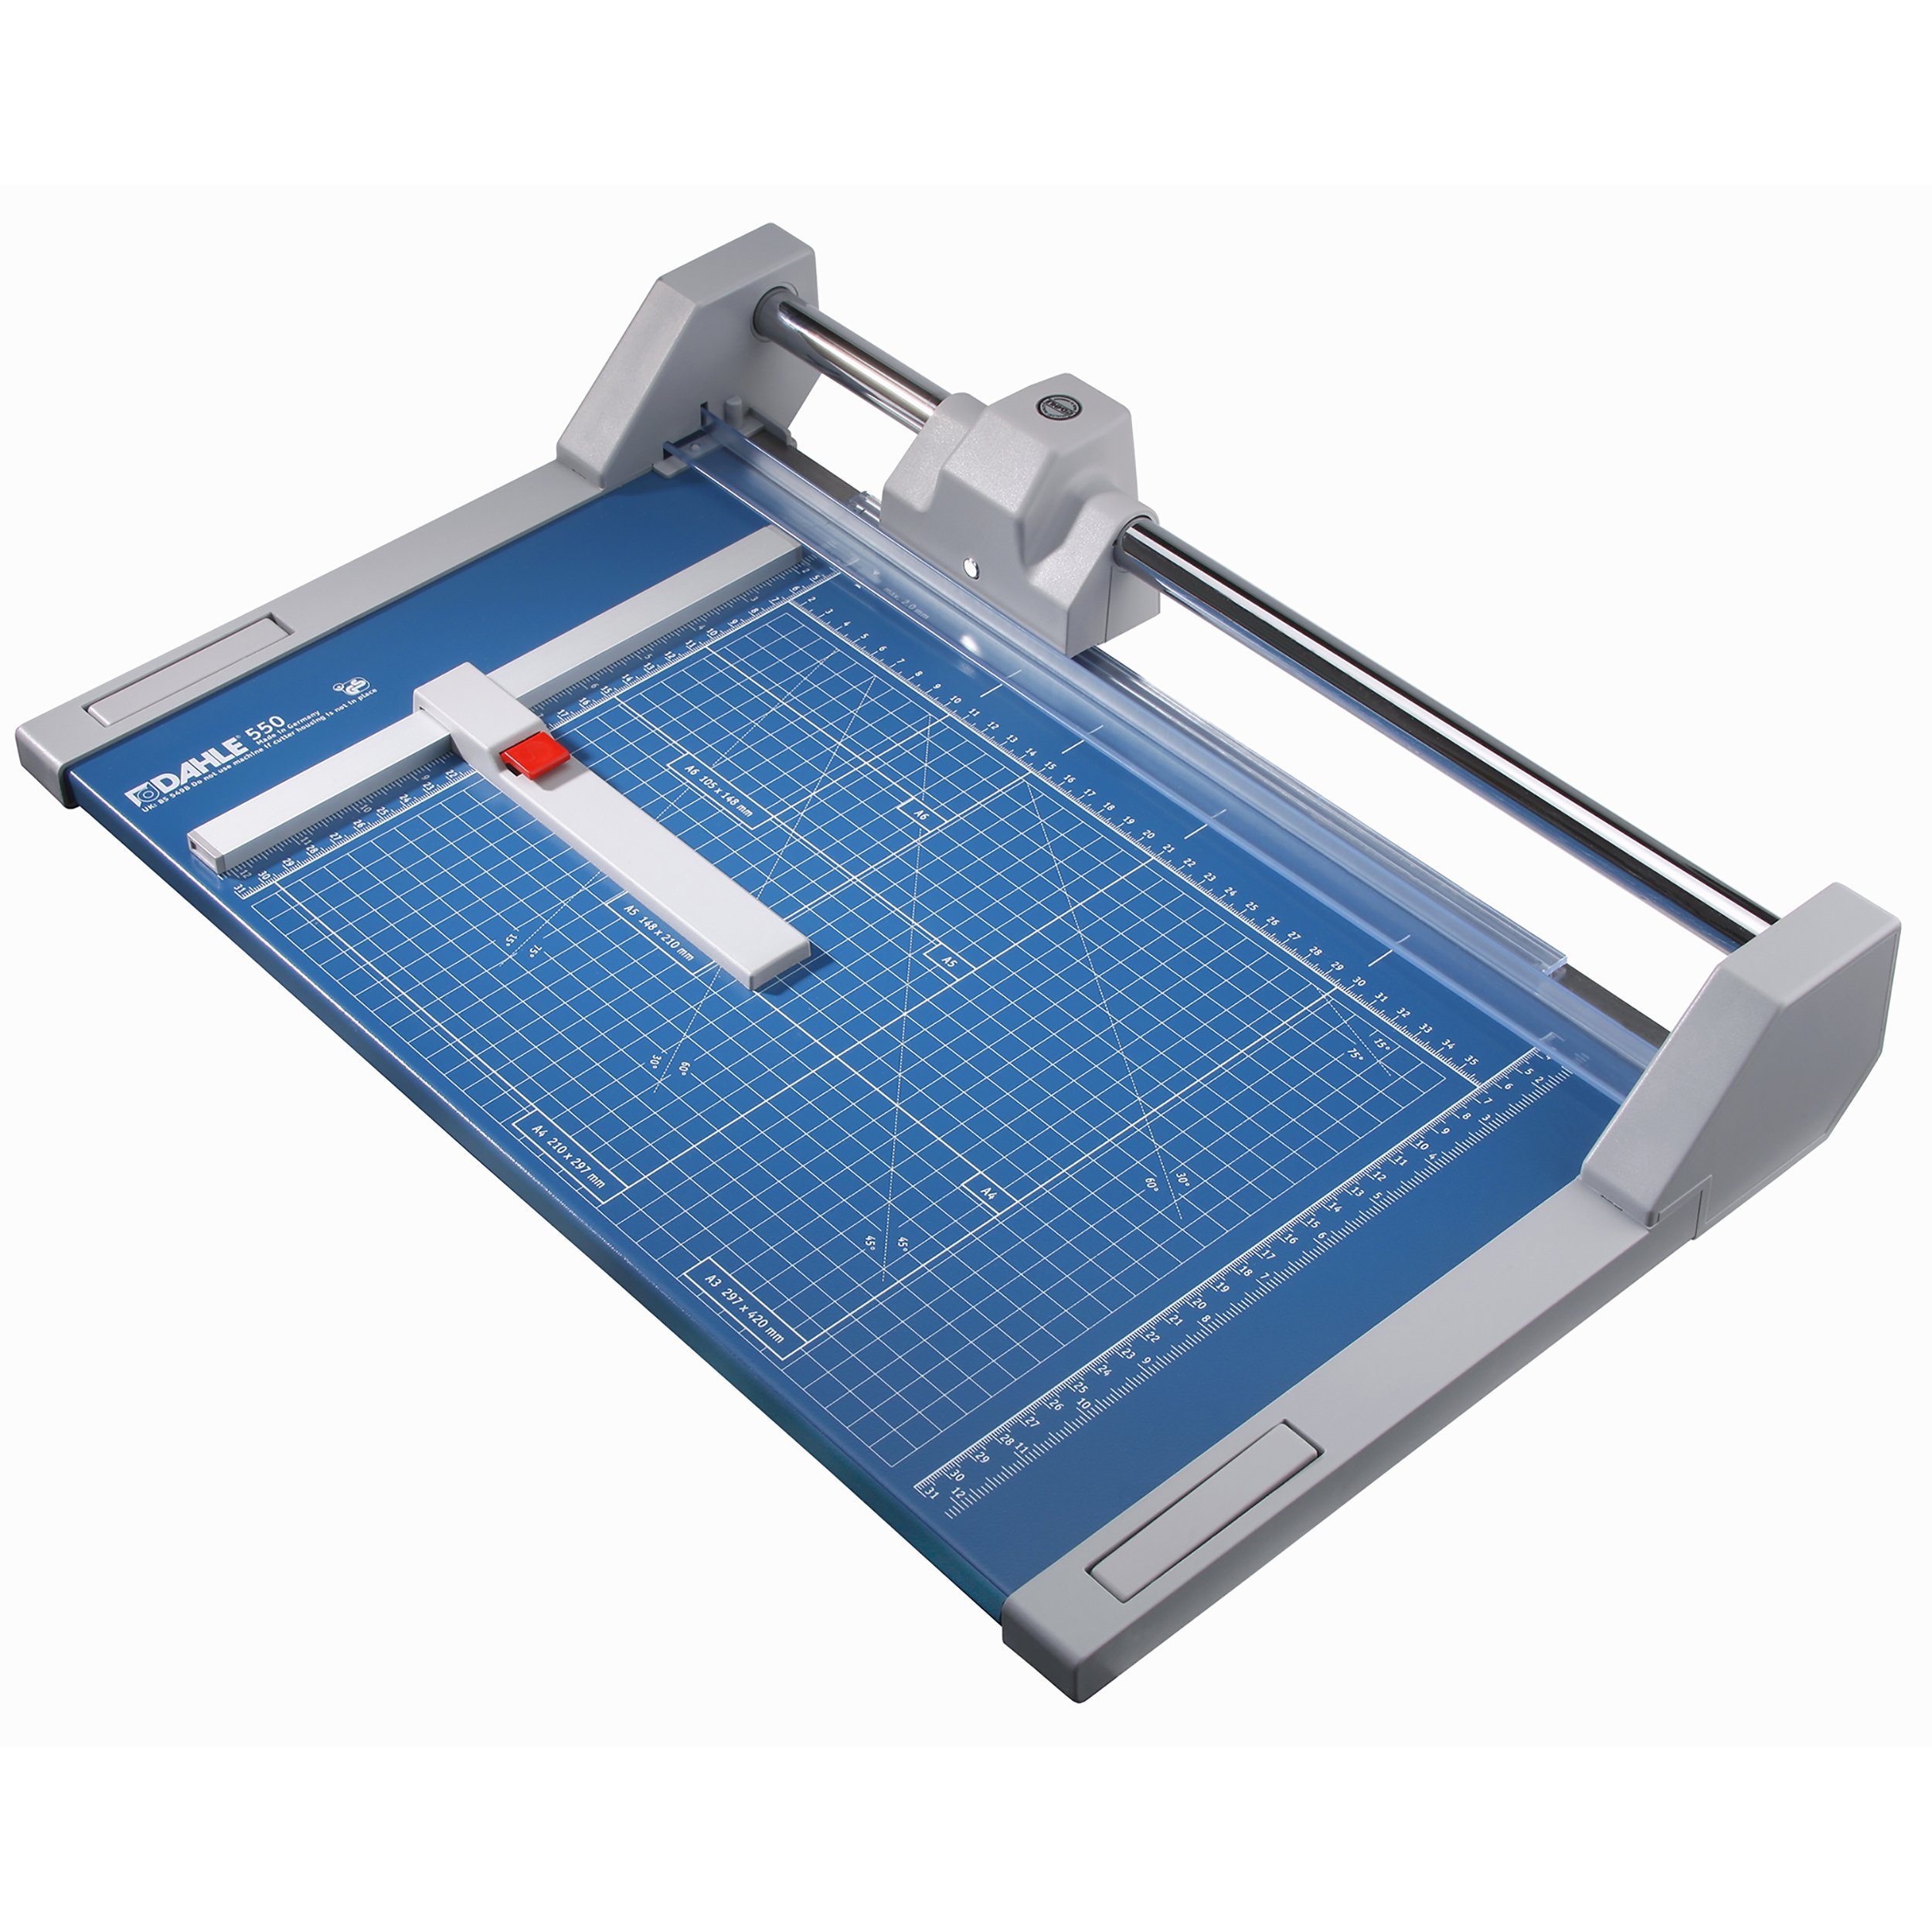 Dahle 550 A4 Professional Paper Trimmer - Click Image to Close